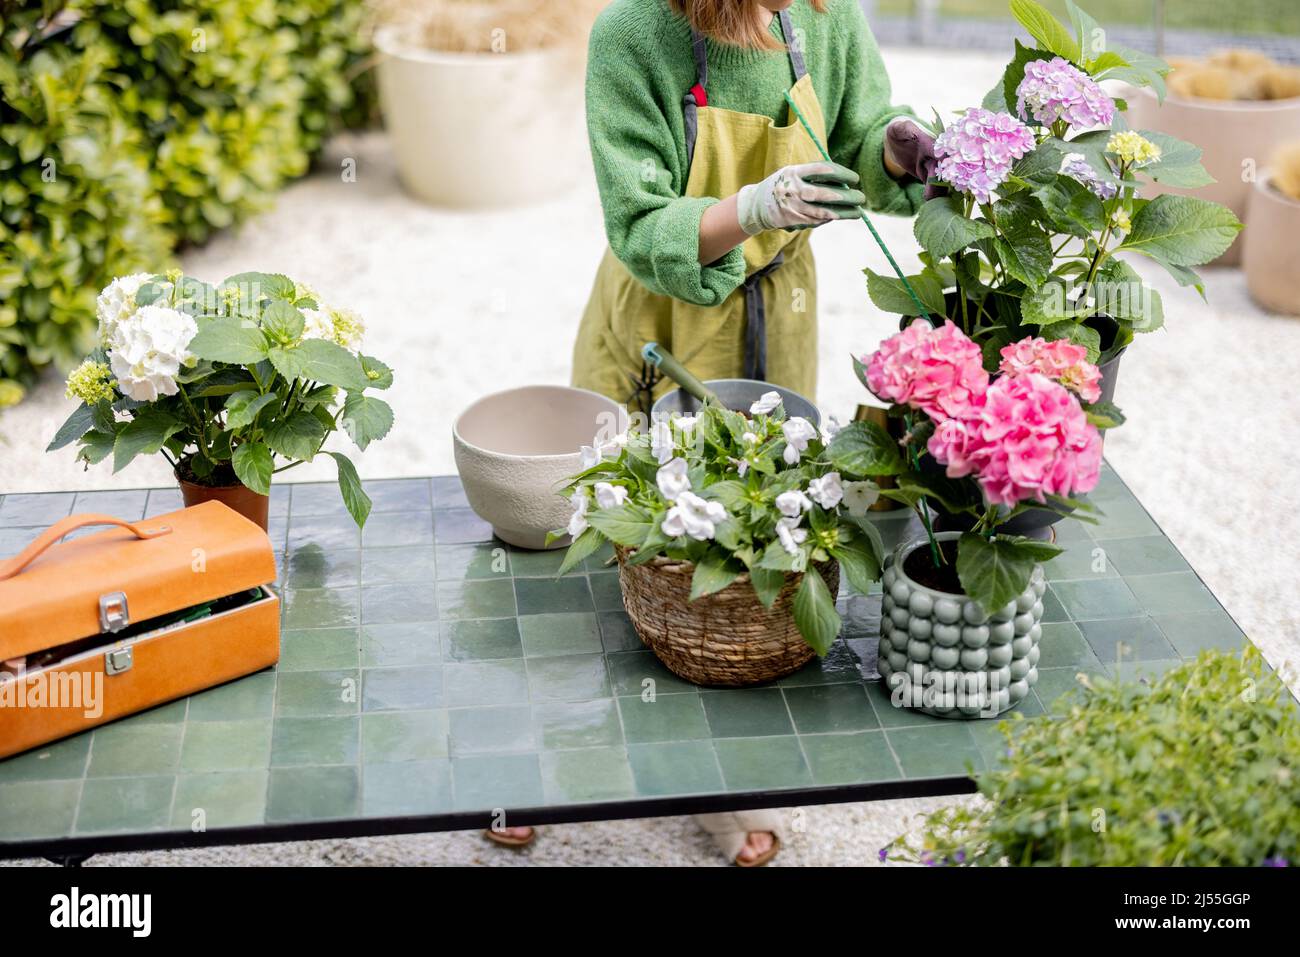 Woman taking care of flowers on table in garden Stock Photo